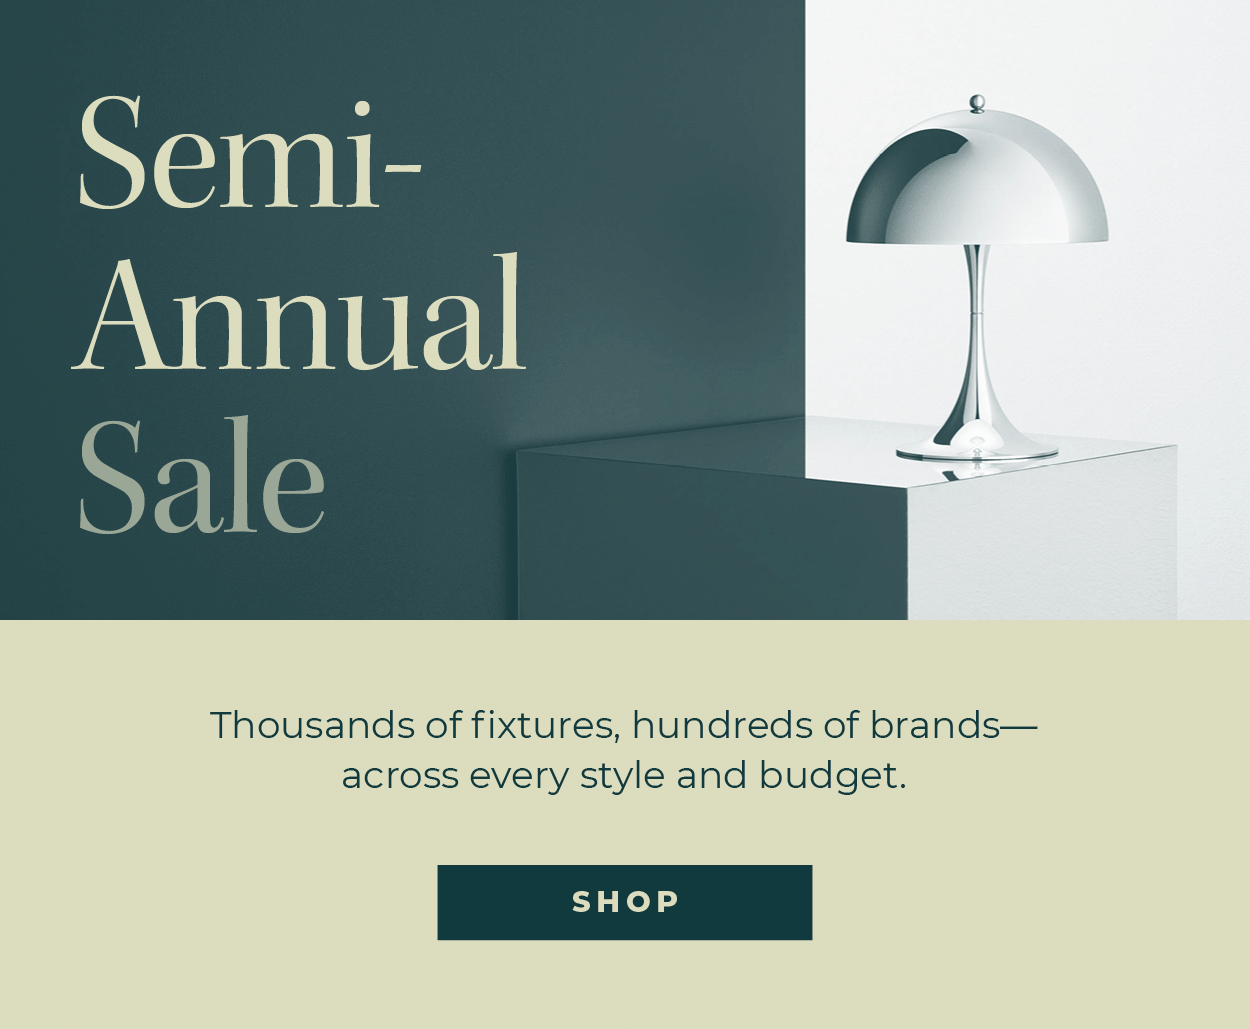 Semi-Annual Sale | Industrial | The epitome of urban chicbring a little edge into your project with these industrial designs. | Shop